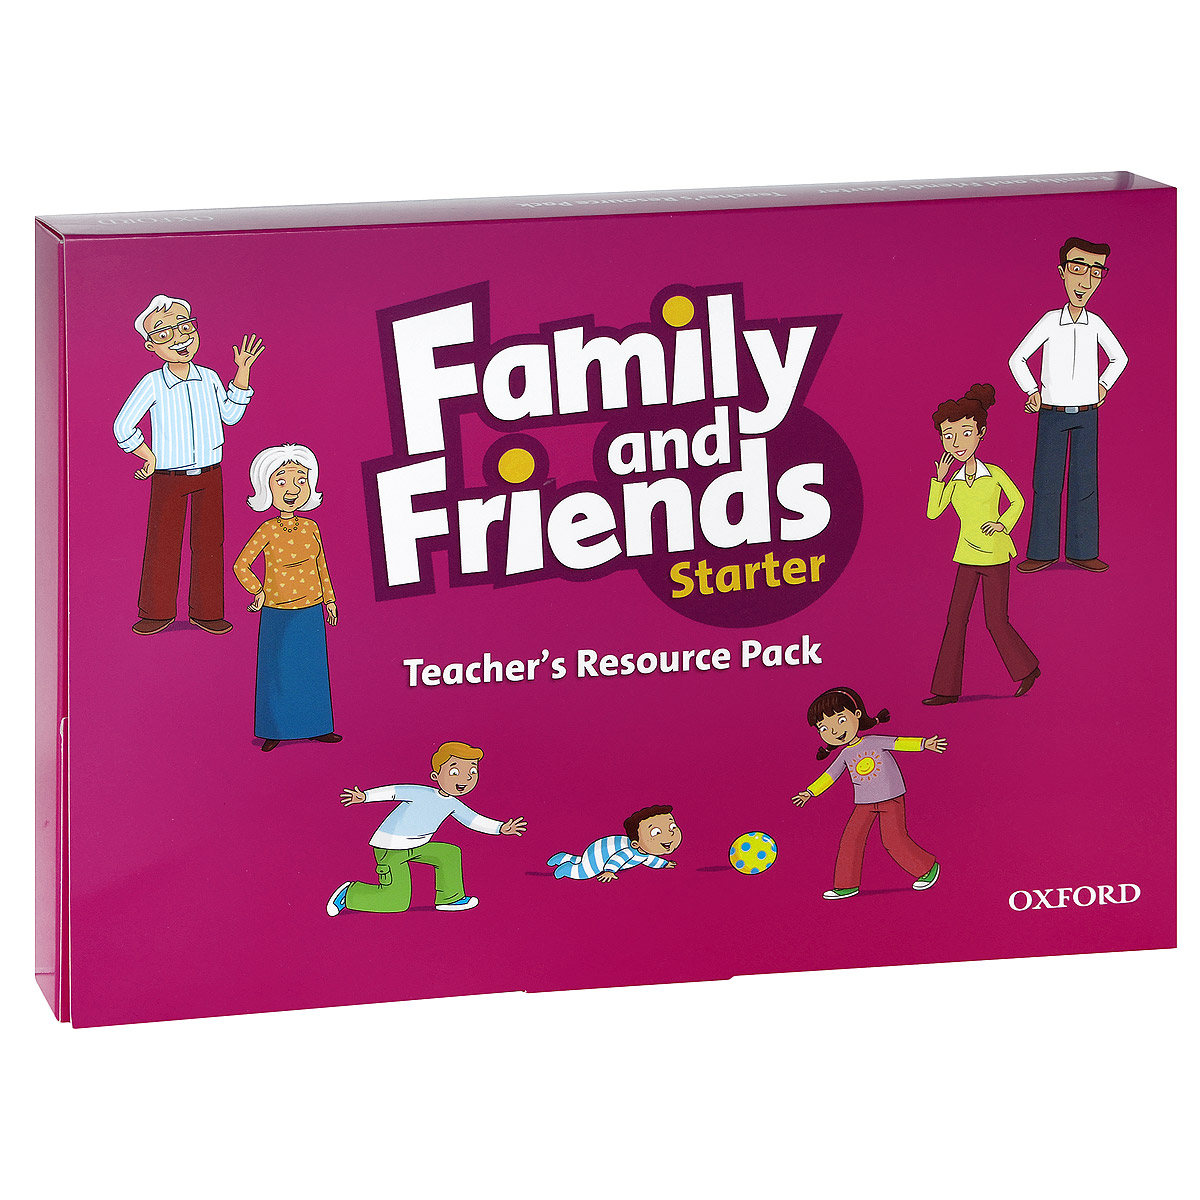 Starter book pdf. Family and friends: Starter. Family and friends Starter книга. Фэмили энд френдс стартер. Family and friends Starter карточки.